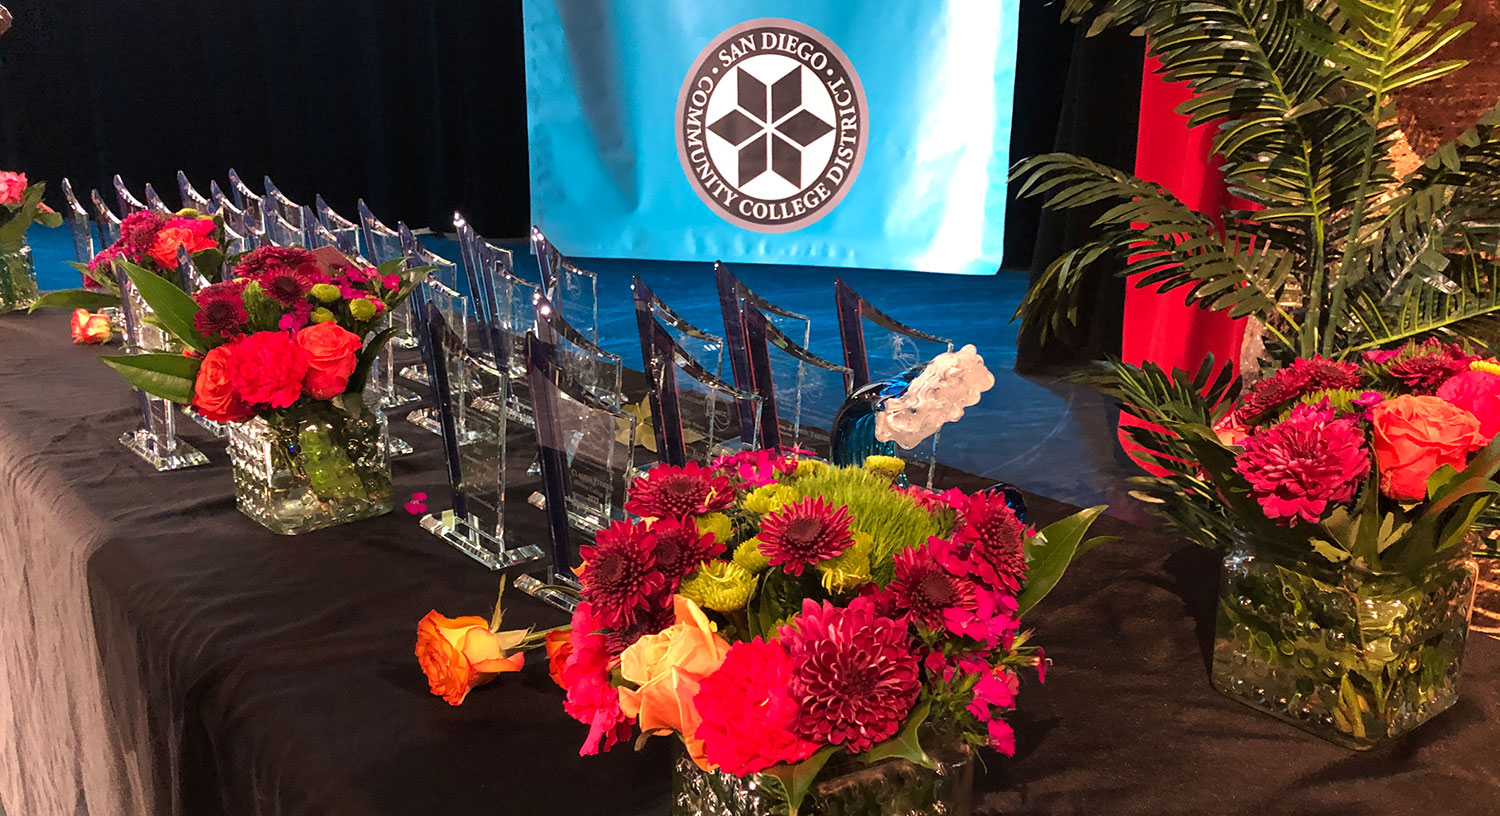 Flowers and award on a table before the event